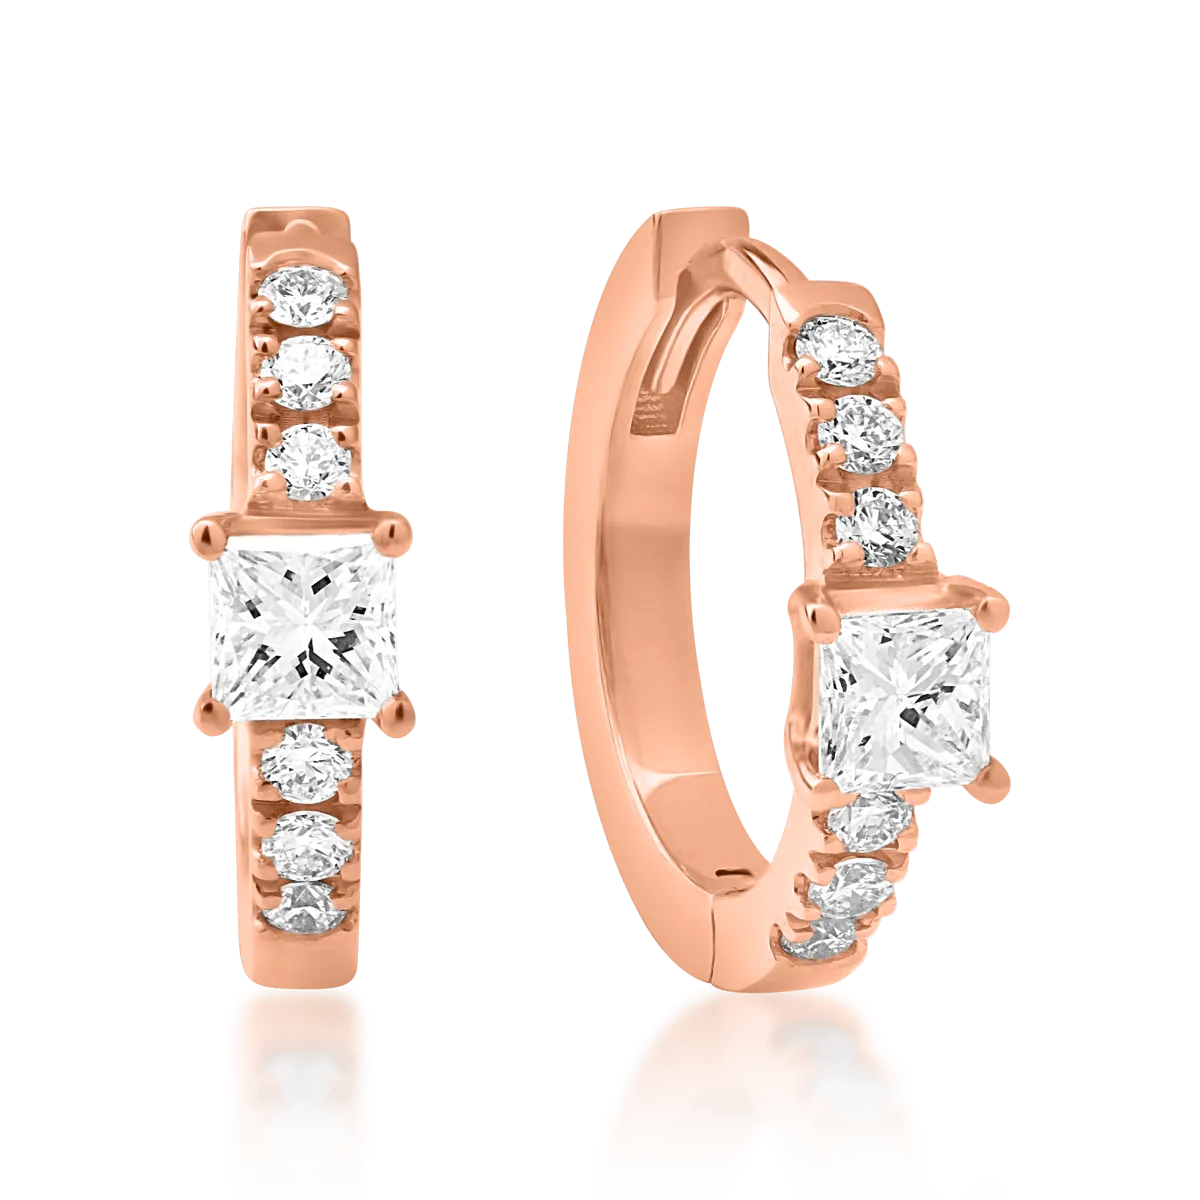 18K rose gold earrings with 0.19ct diamonds